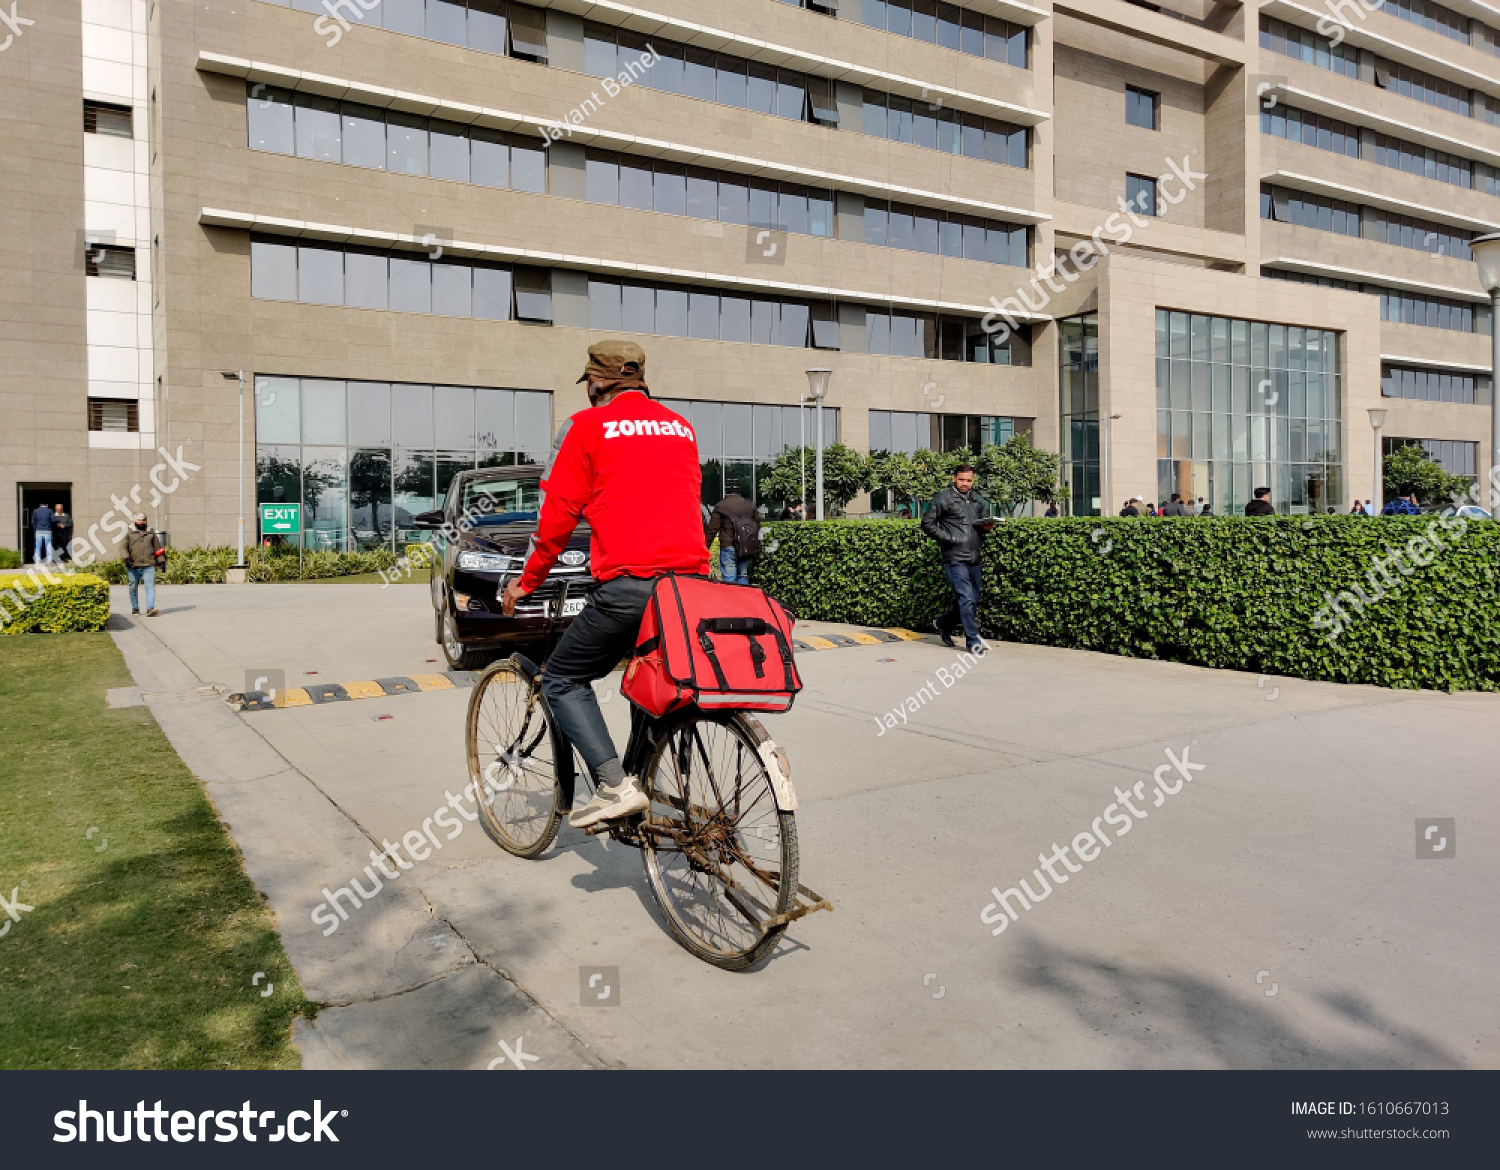 zomato cycle delivery